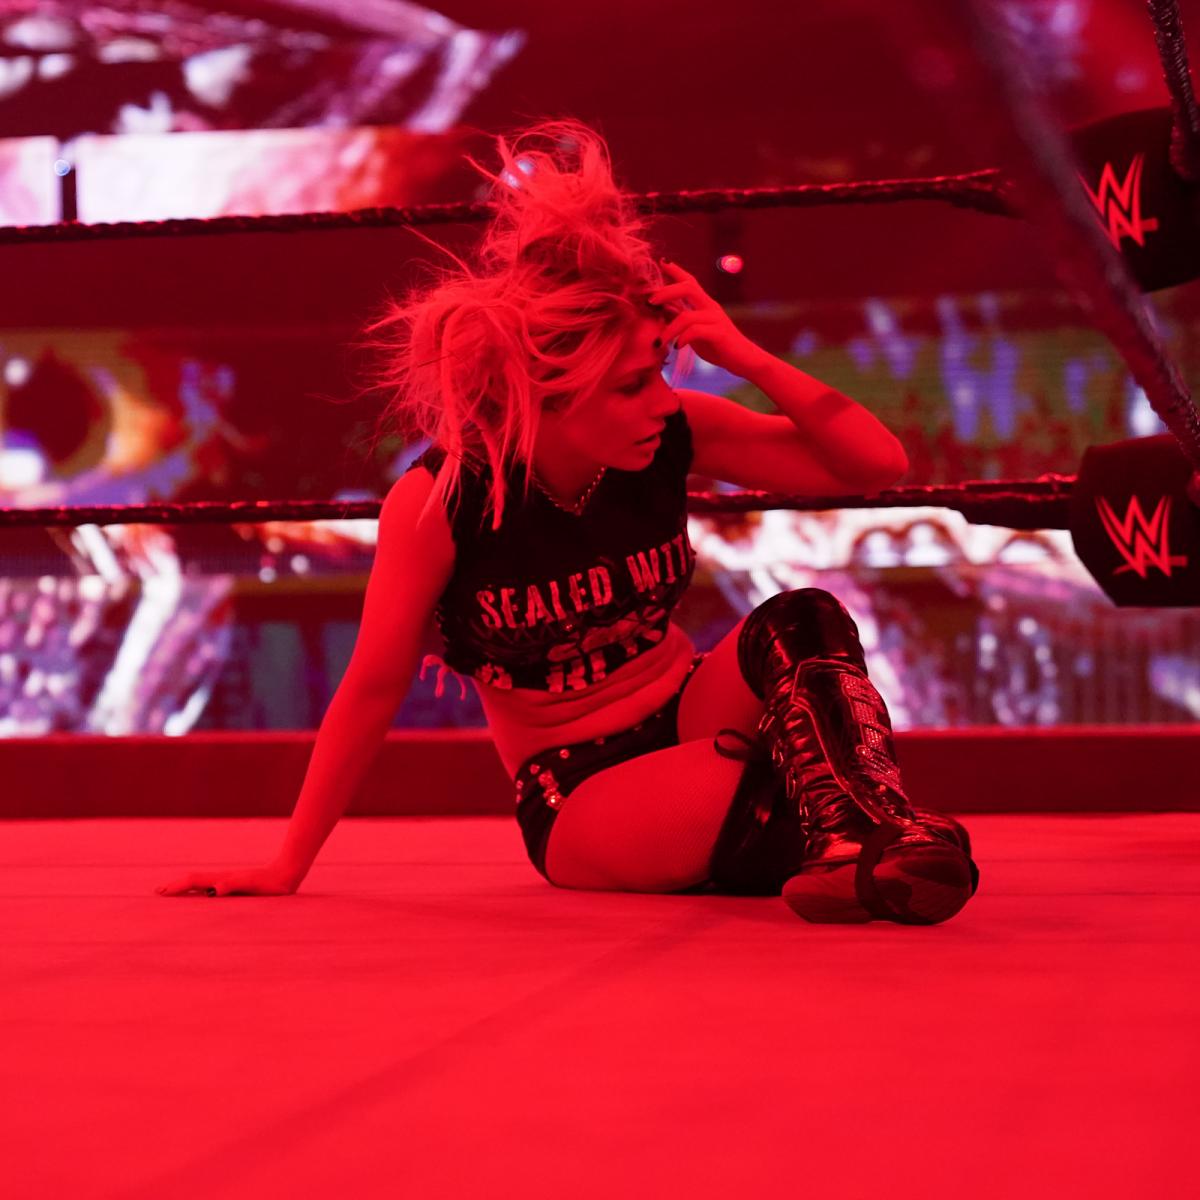 Alexa Bliss was under a trance after The Fiend's music played